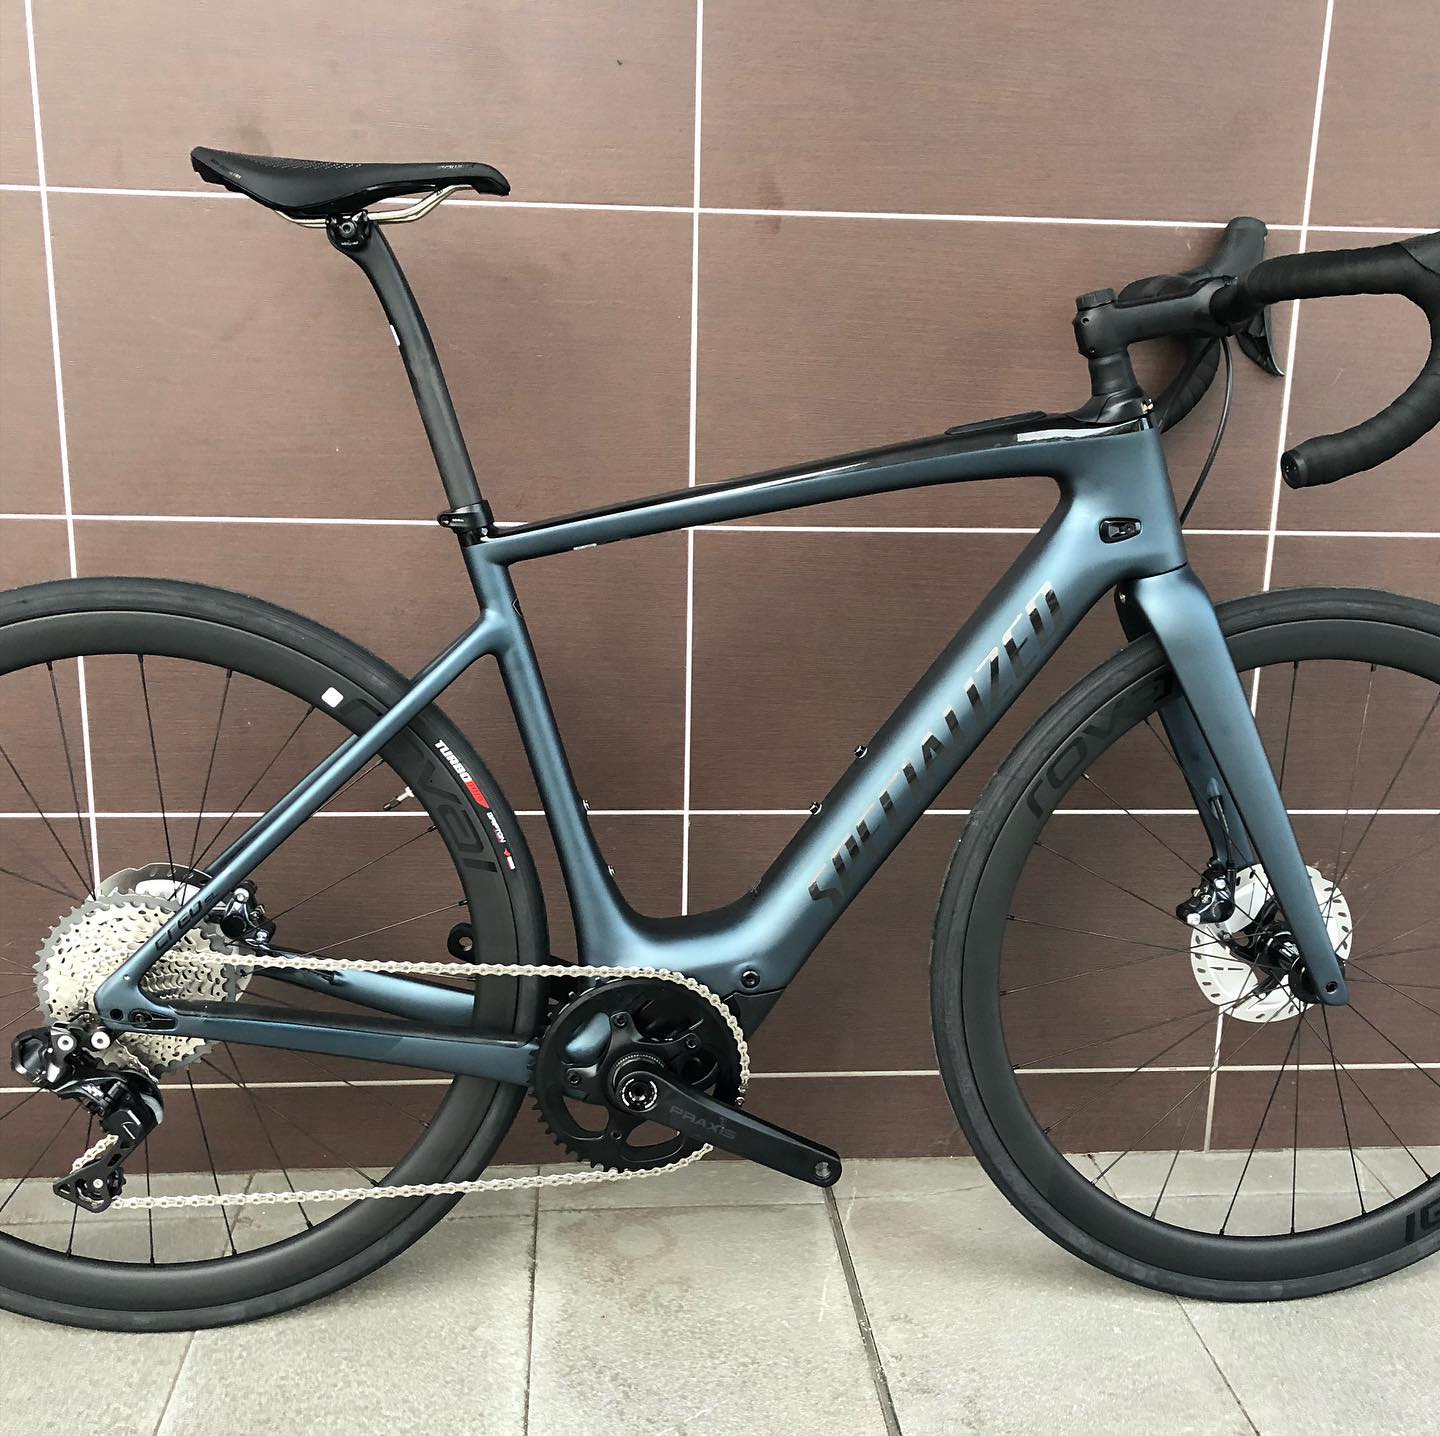 2022 Specialized S-Works Turbo Creo SL EVO Whatsap Number : +49 1521 5